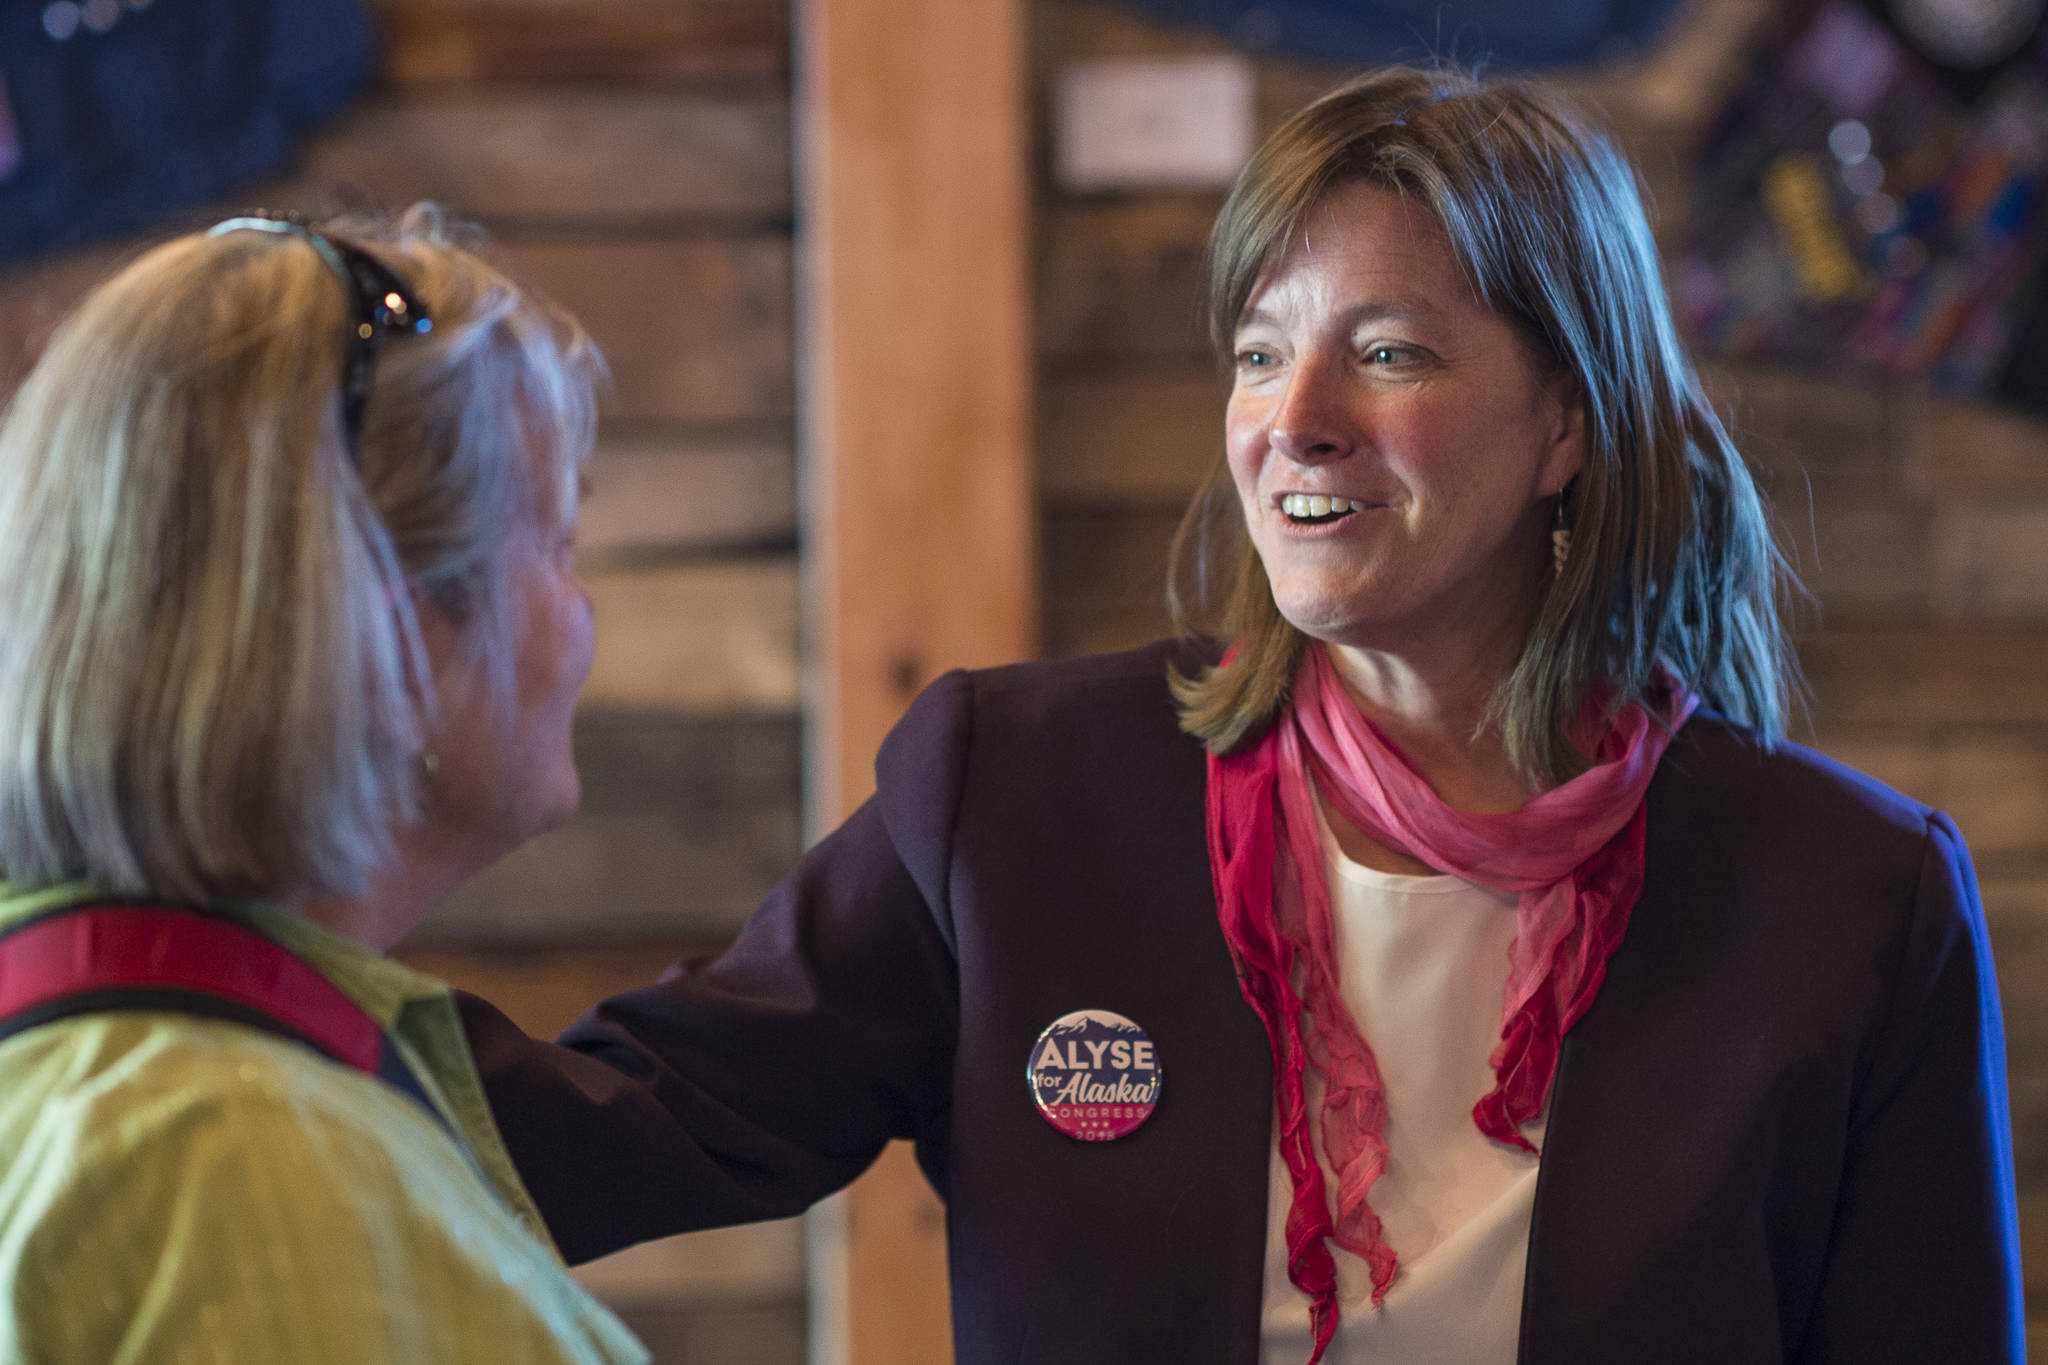 Alyse Galvin, indpendent candidate for U.S. House of Representatives, right, speaks with Marilyn Orr during a “town-hall-style coffee and conversation” at 60 Degrees North Coffee and Tea on Friday, Sept. 14, 2018. Galvin is running against Republican incumbent Rep. Don Young. (Michael Penn | Juneau Empire)